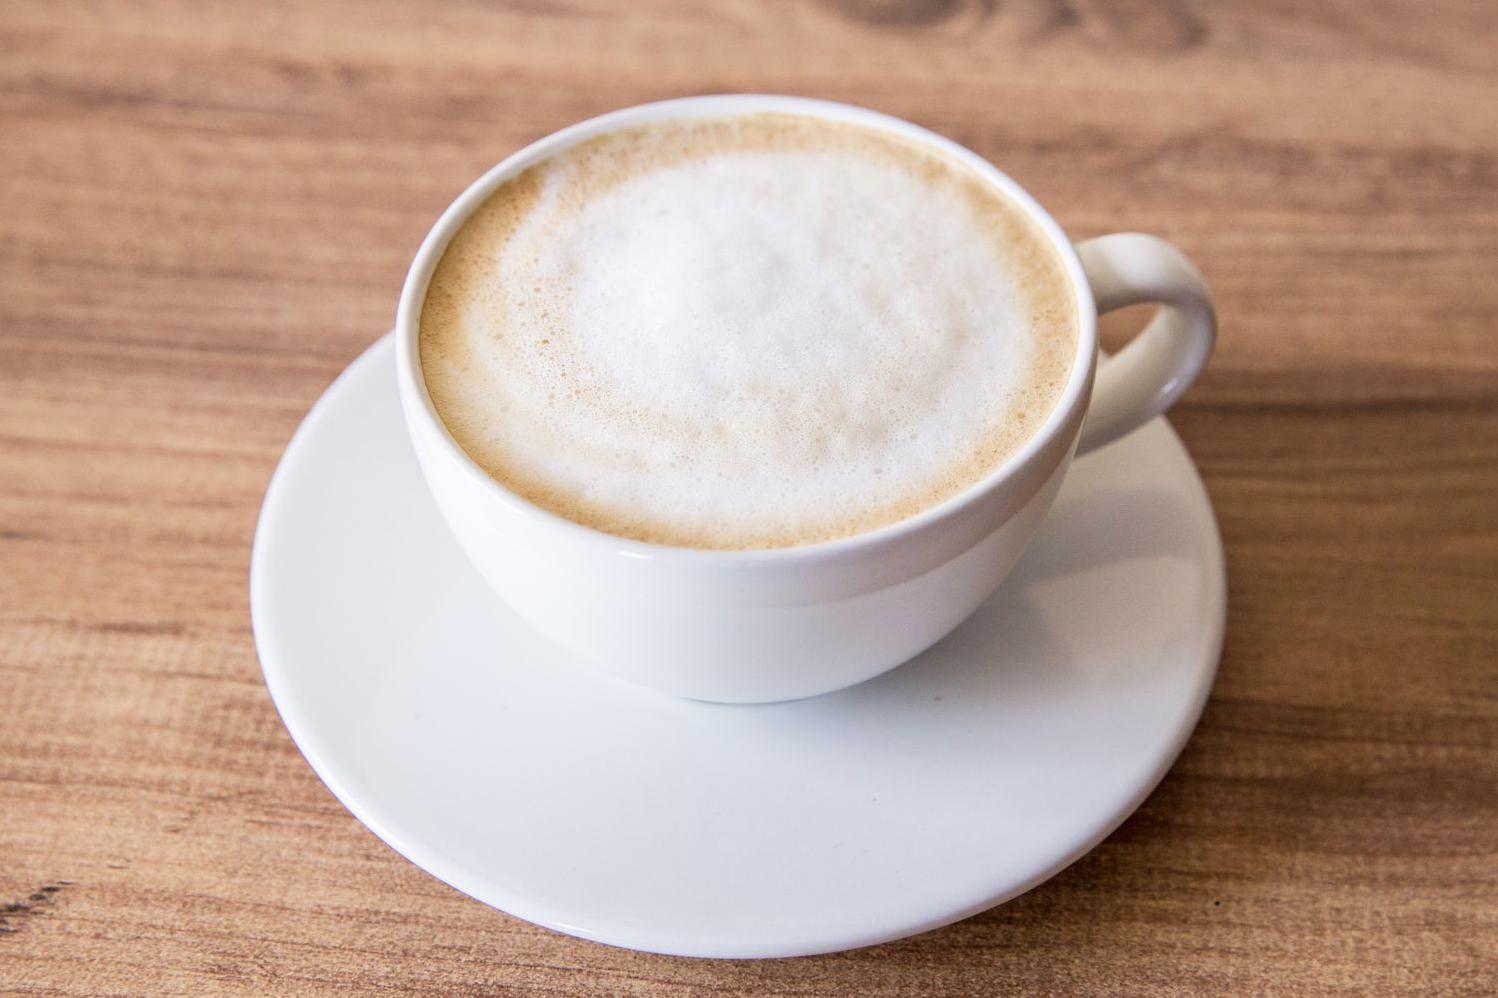  The perfect balance of espresso and frothy milk.